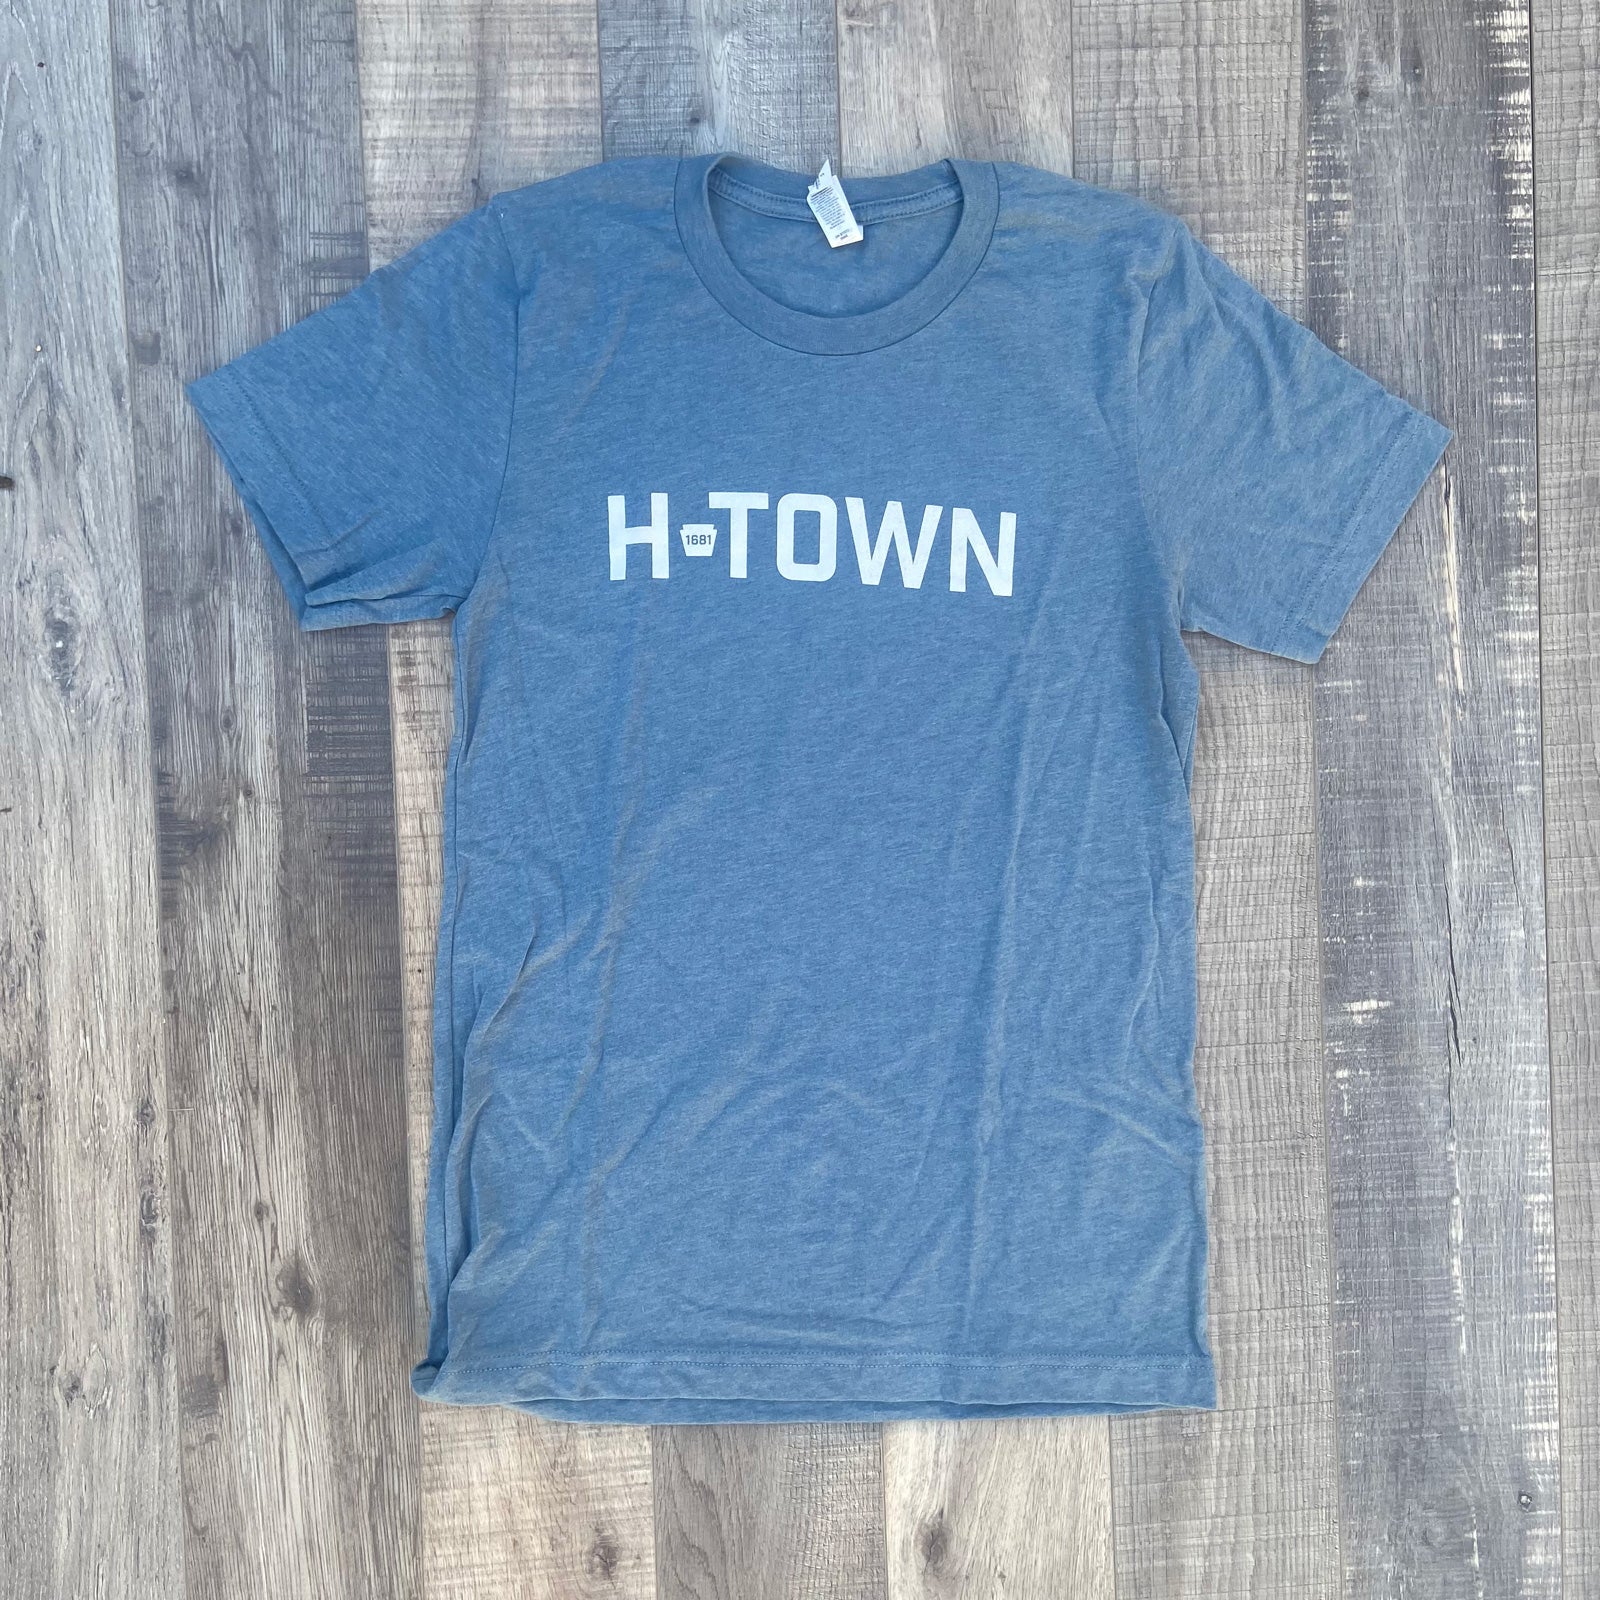 H town tシャツh-town-